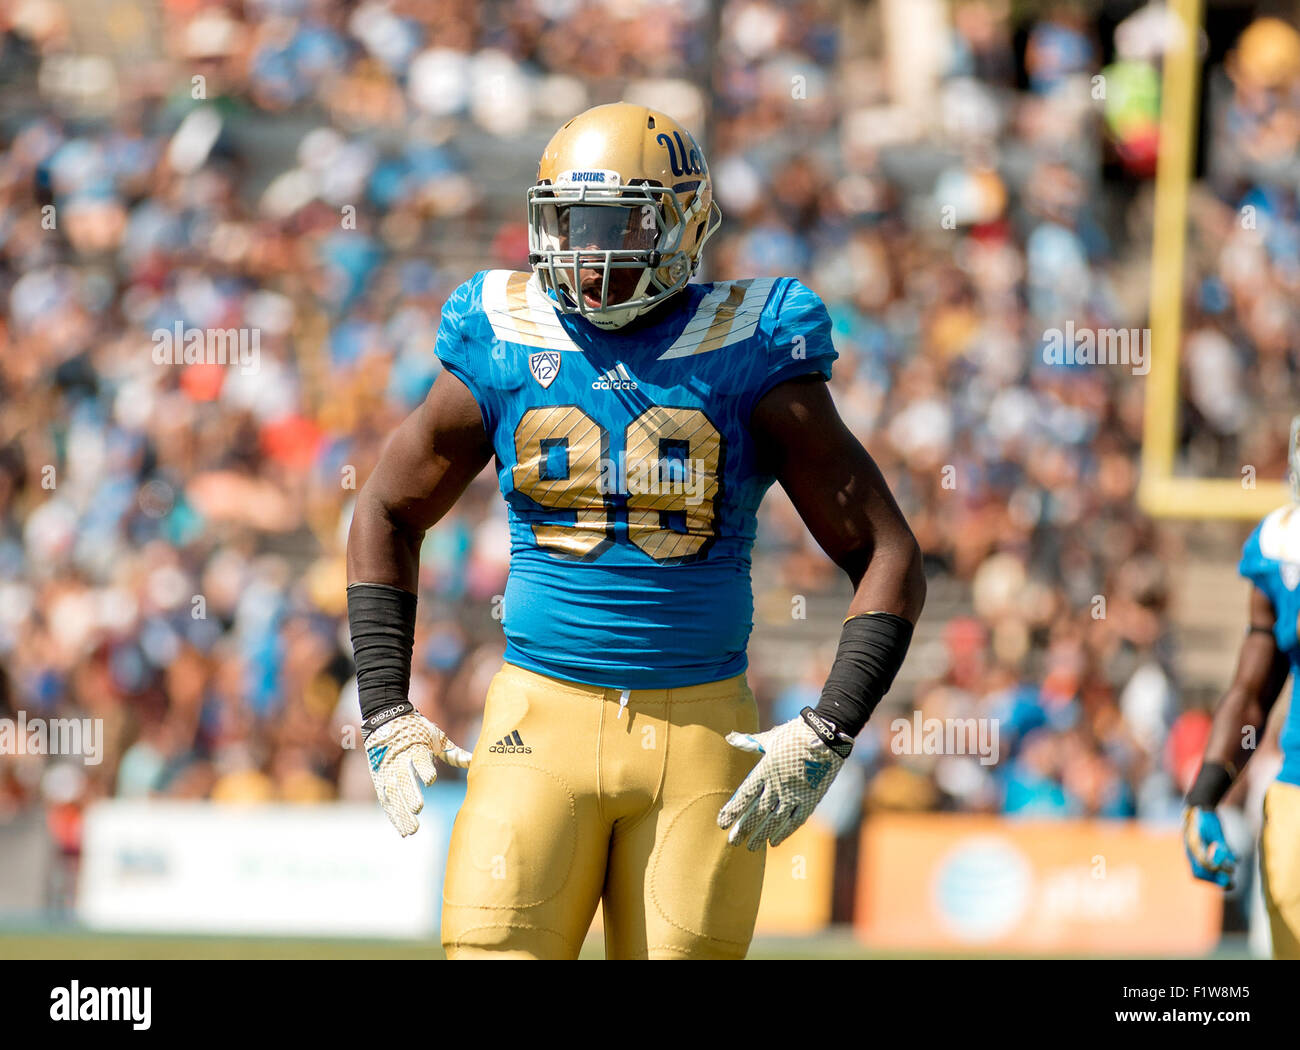 Pasadena, CA. 5th Sep, 2015. UCLA Bruins defensive lineman (98) Takkarist McKinley in action during the Virginia Cavaliers vs UCLA Bruins football game. 13th ranked UCLA defeated Virginia 34-16 on Saturday, September 5, 2015 at the Rose Bowl in Pasadena, California. (Mandatory Credit: Juan Lainez/MarinMedia.org/Cal Sport Media) (Complete photographer, and credit required) © csm/Alamy Live News Stock Photo